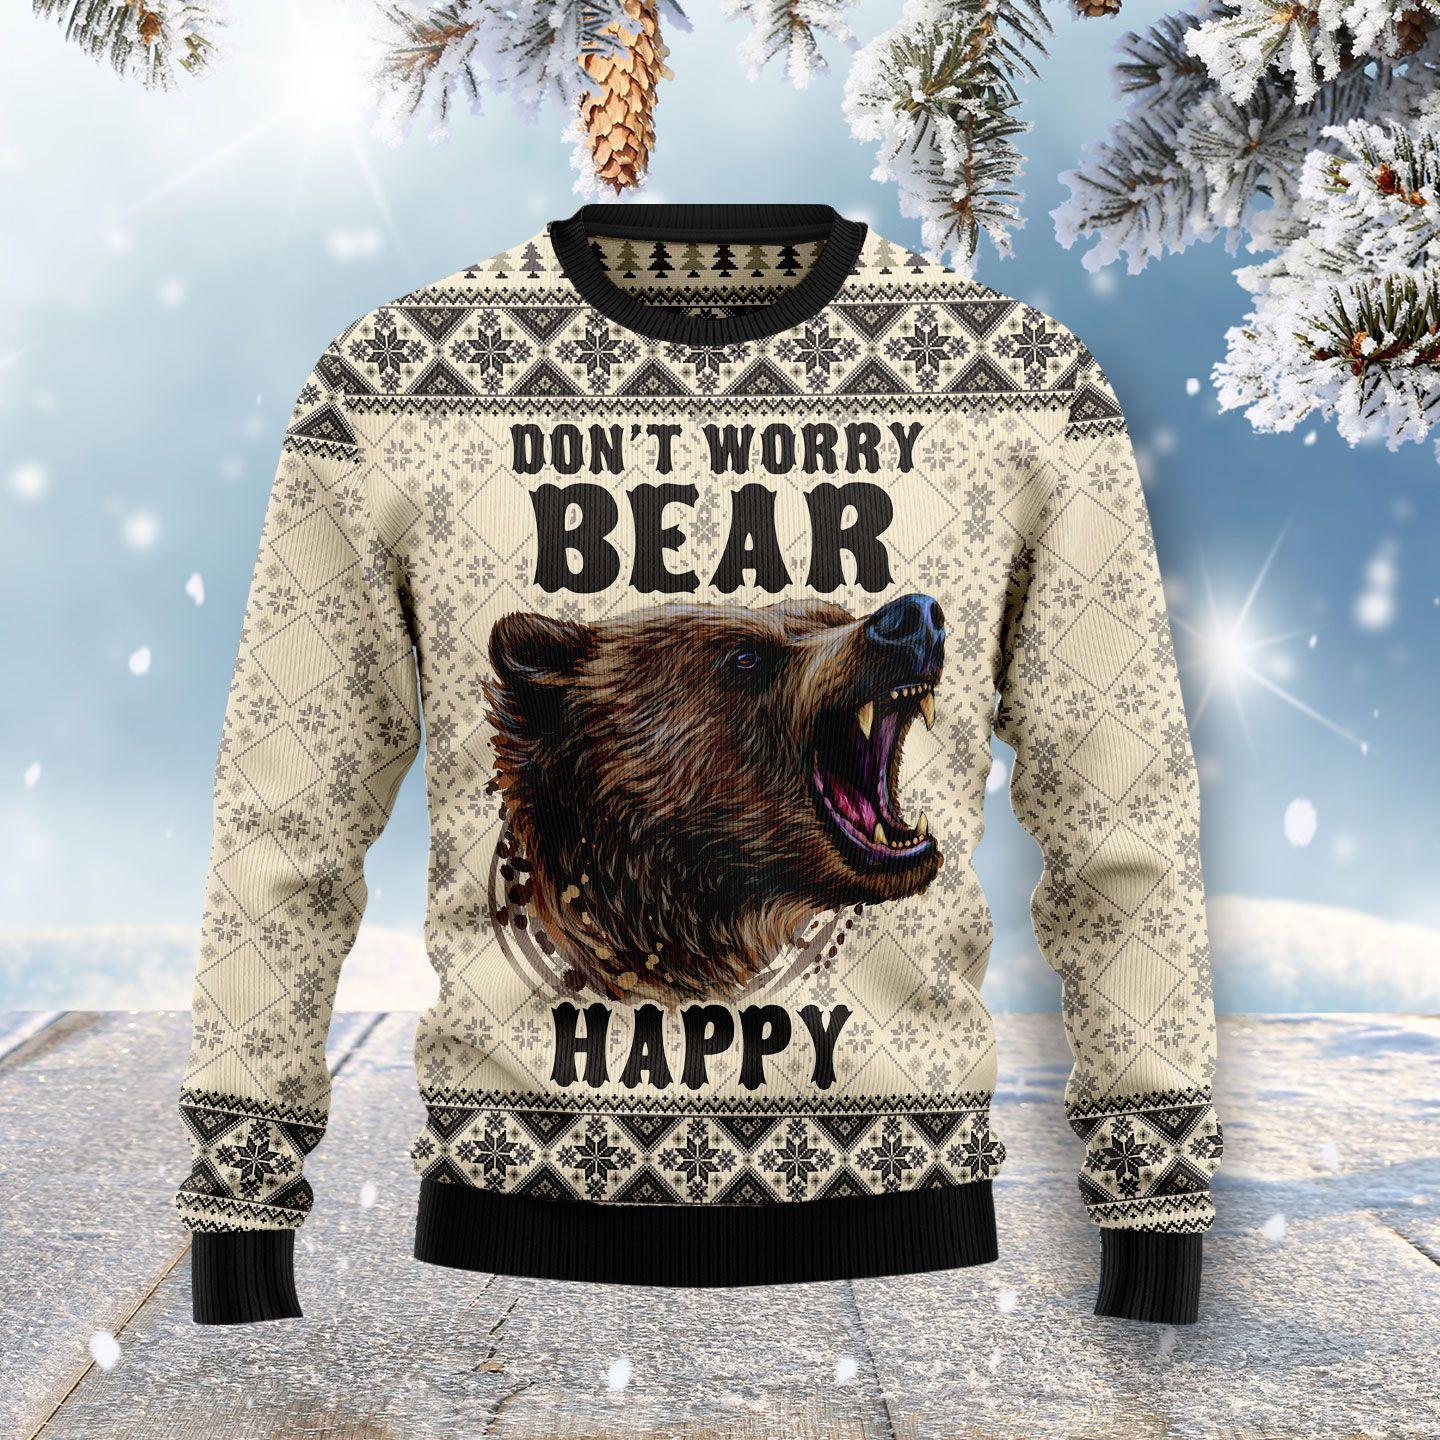 Dont Worry Bear Happy Ugly Christmas Sweater Ugly Sweater For Men Women, Holiday Sweater